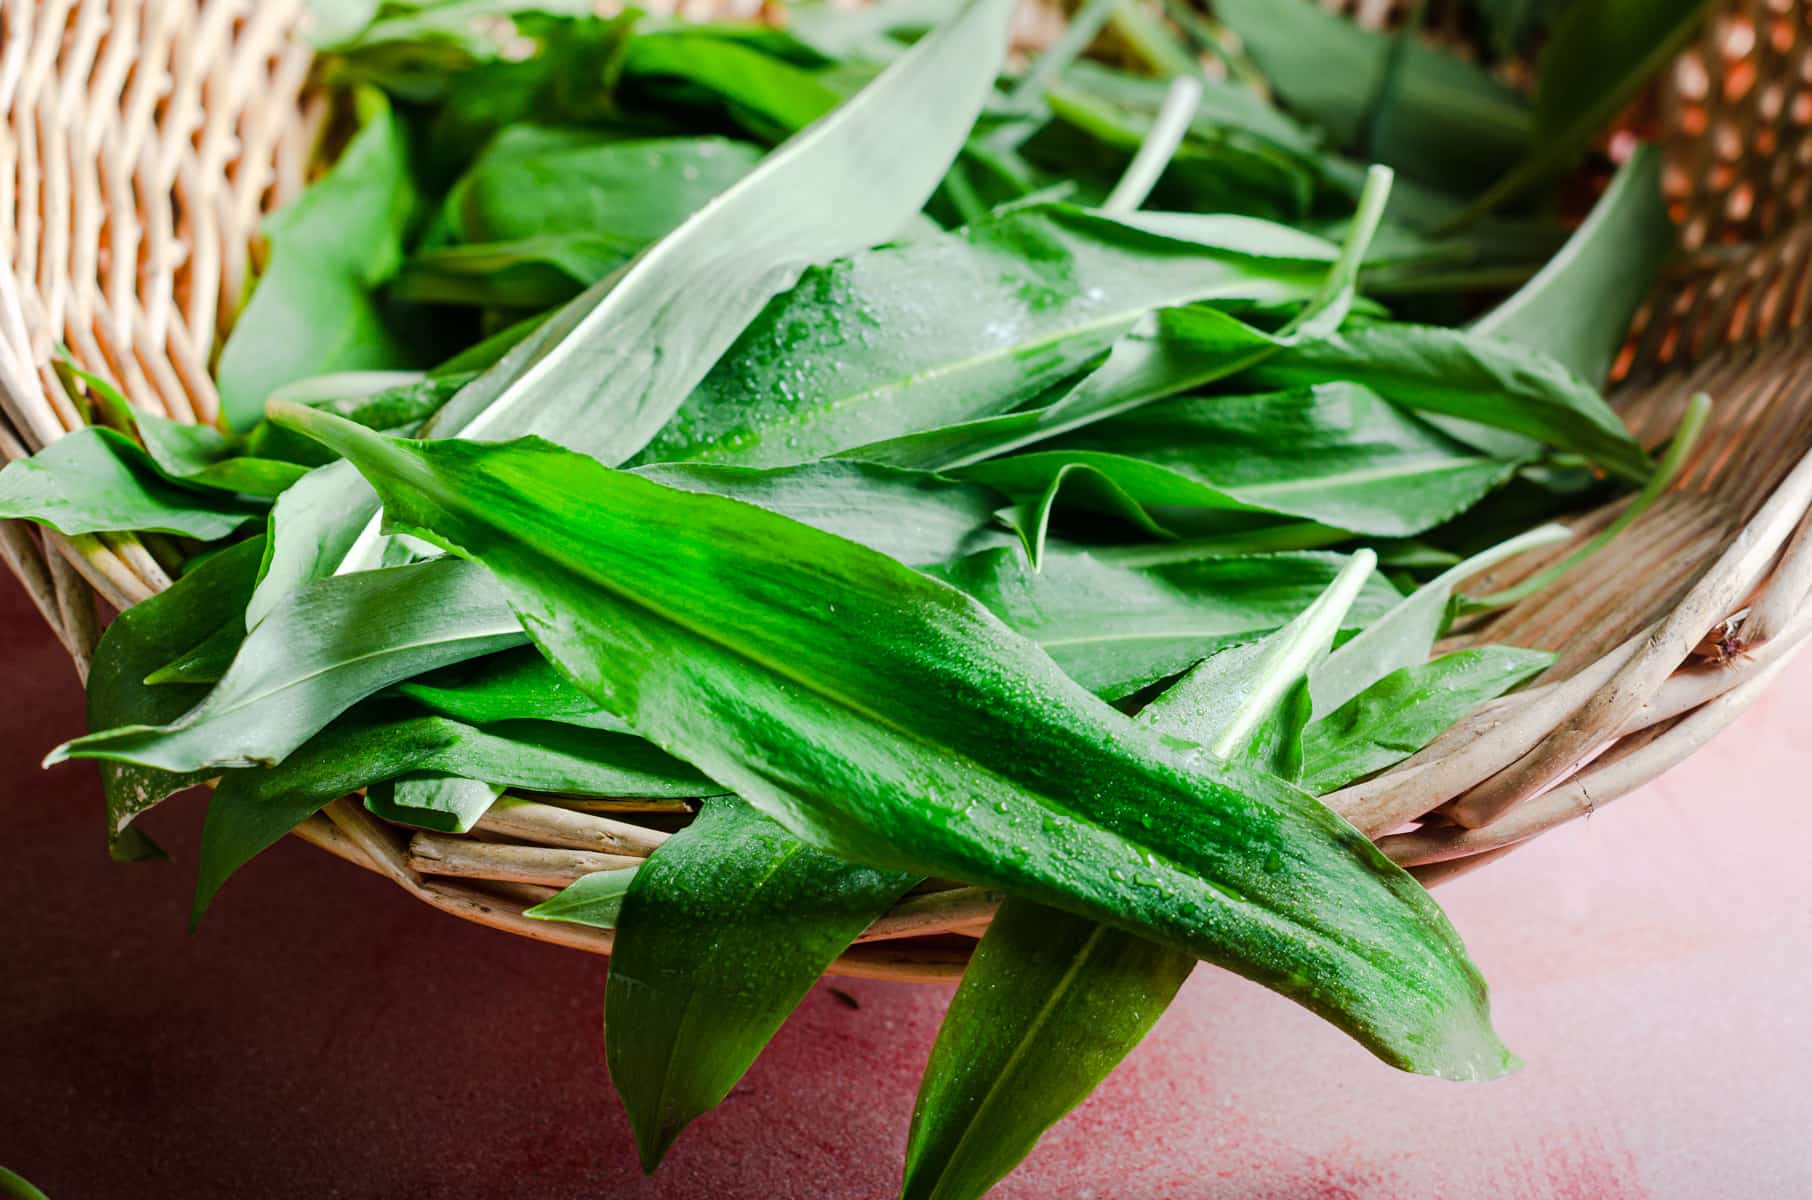 A basket filled with freshly picked wild garlic leaves on a pink surface.